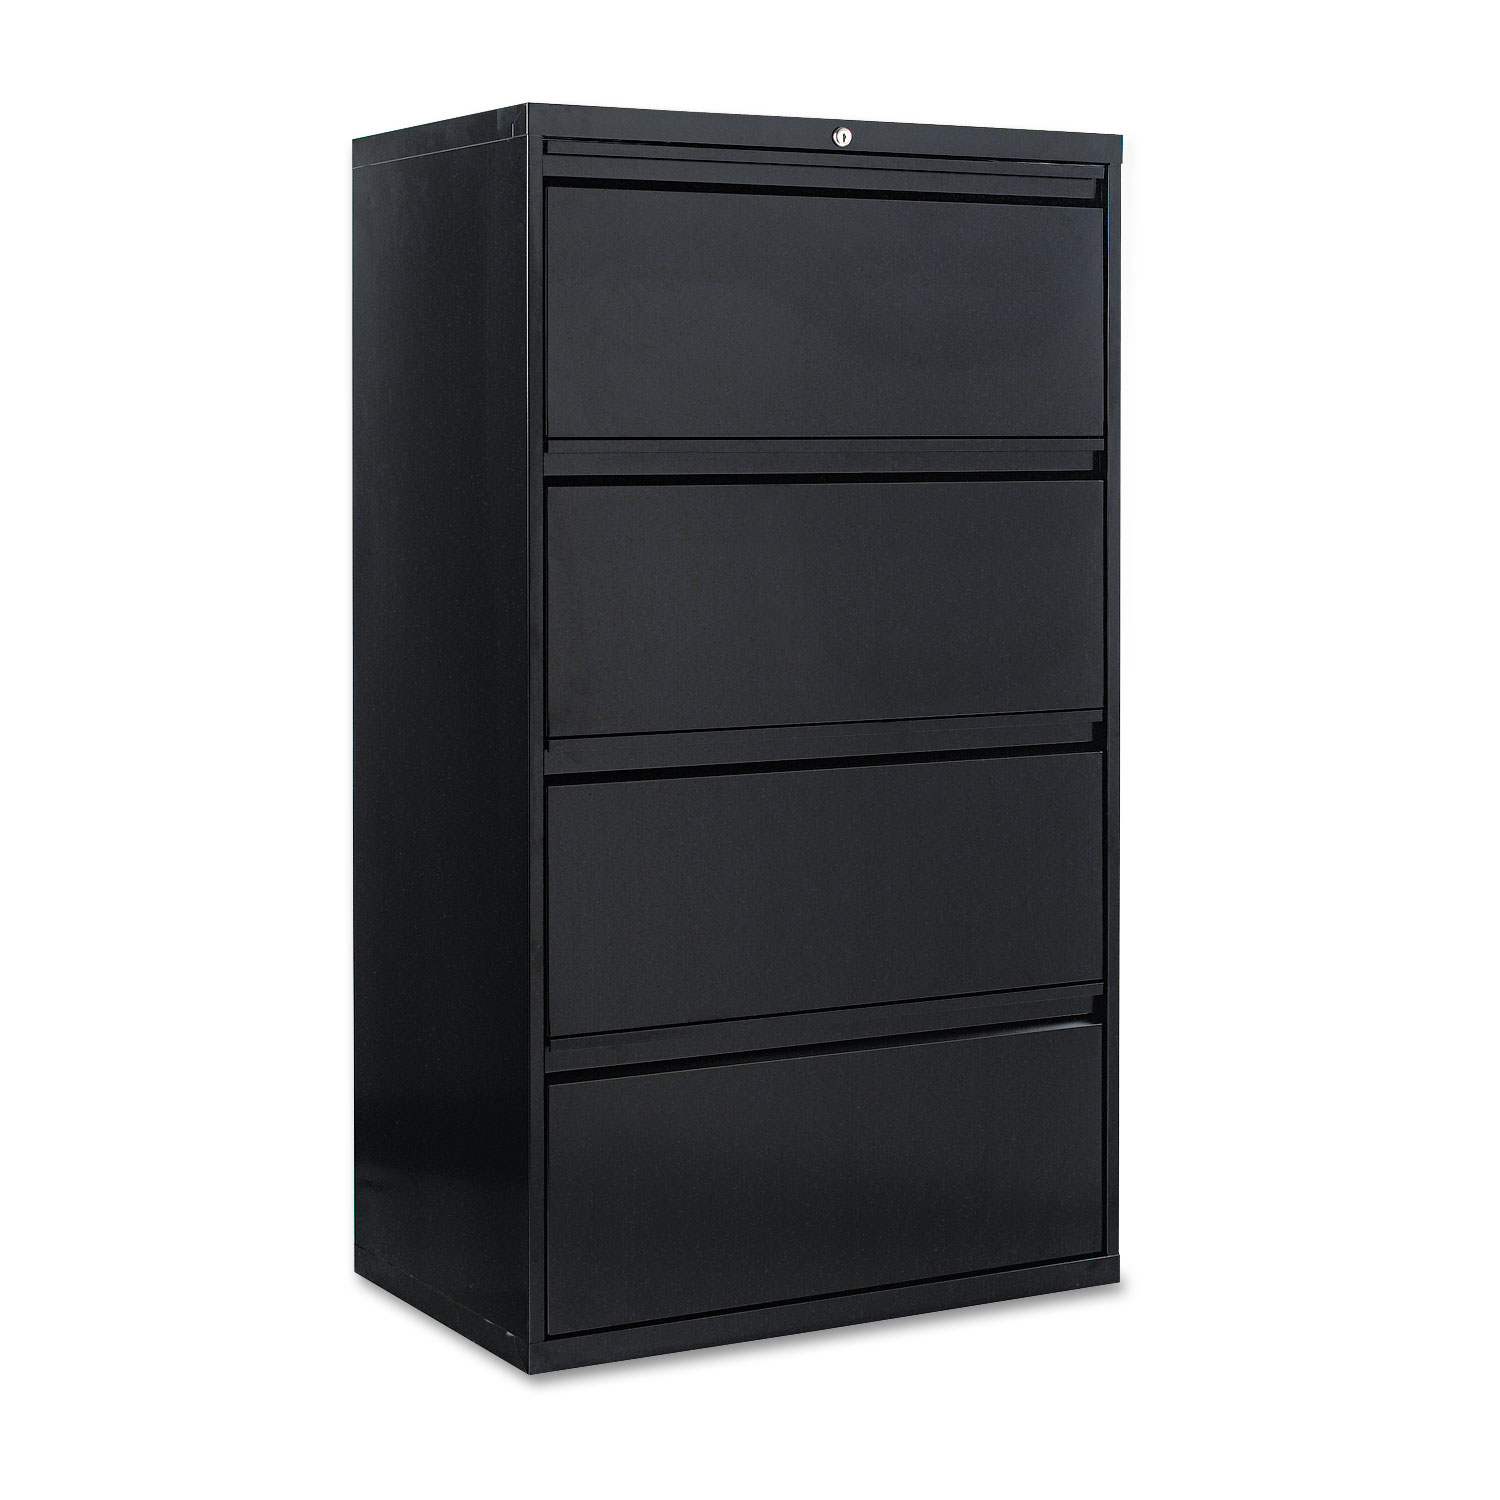 Four-Drawer Lateral File Cabinet, 30w x 18d x 52 1/2h, Black